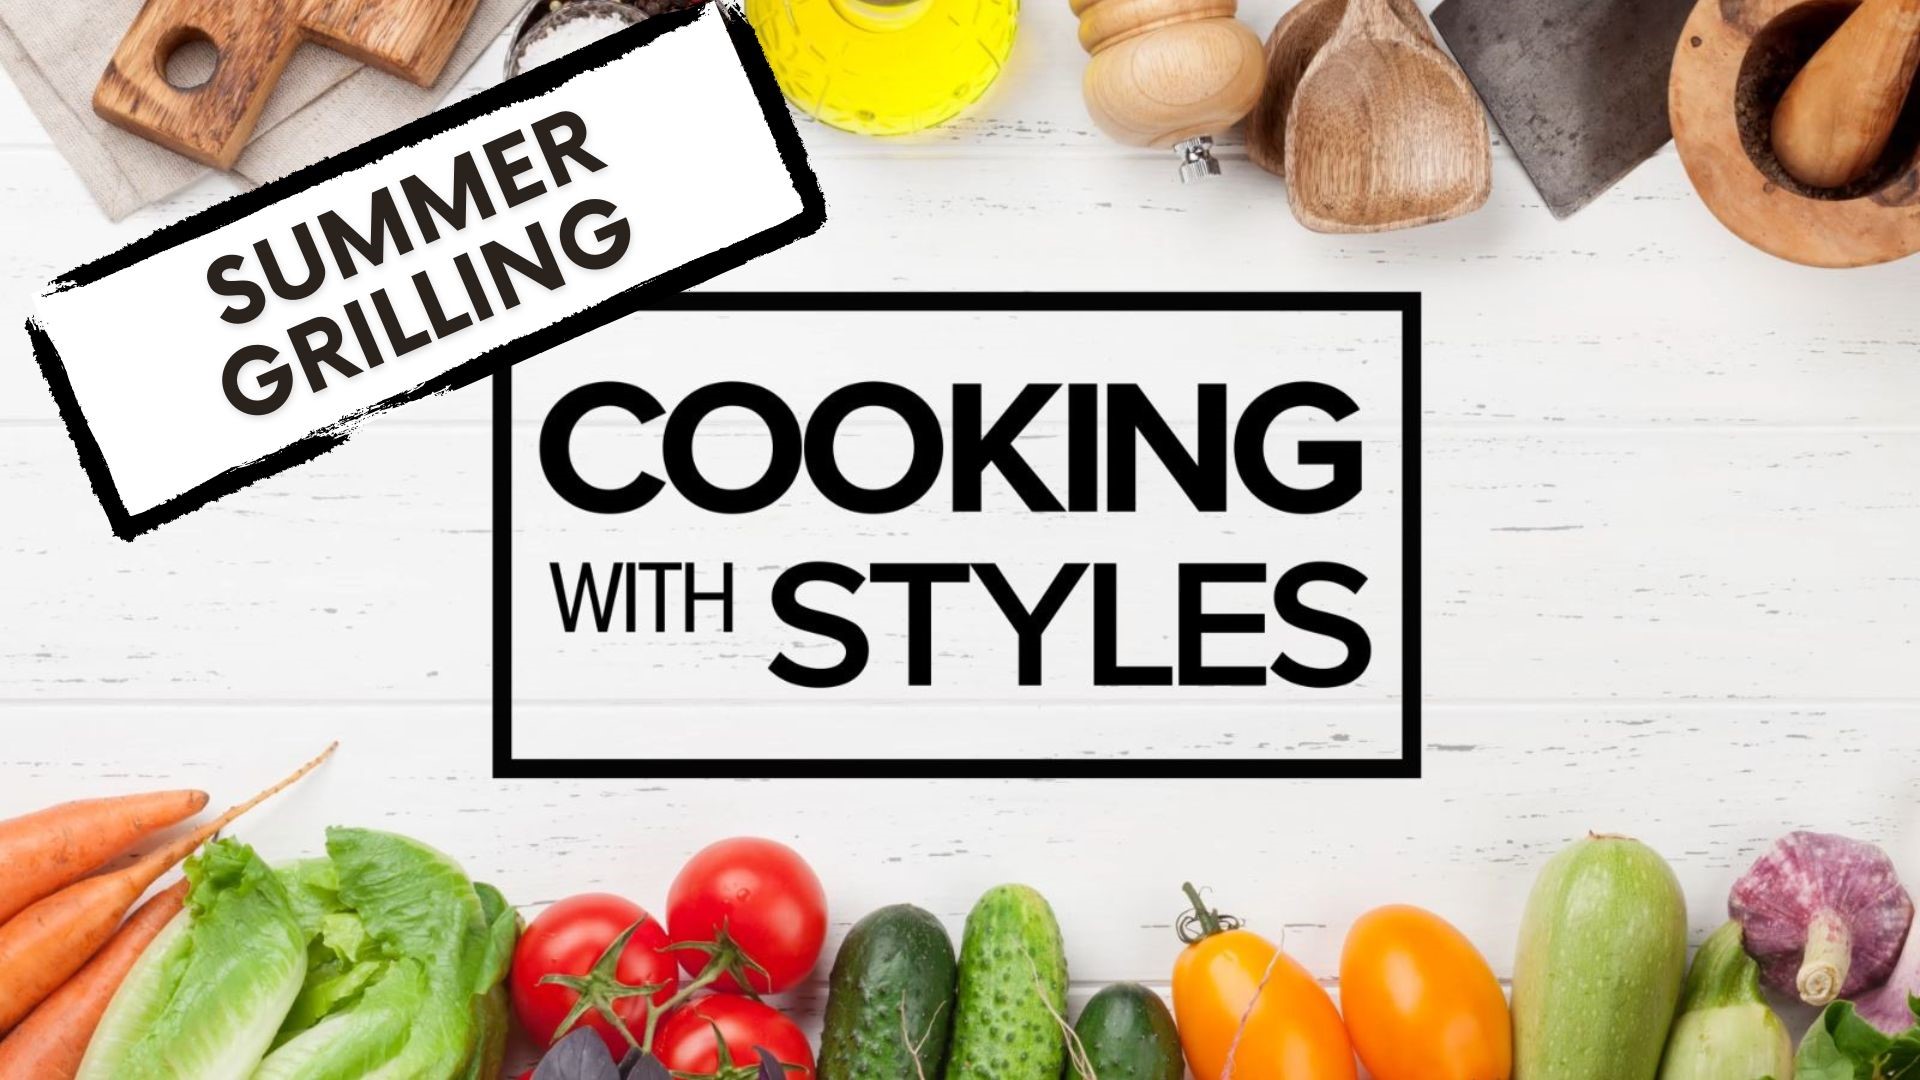 Shawn Styles shares some of his favorite recipes for the grill, including an Italian hamburger, eggplant asparagus neopolitan, chicken and more.